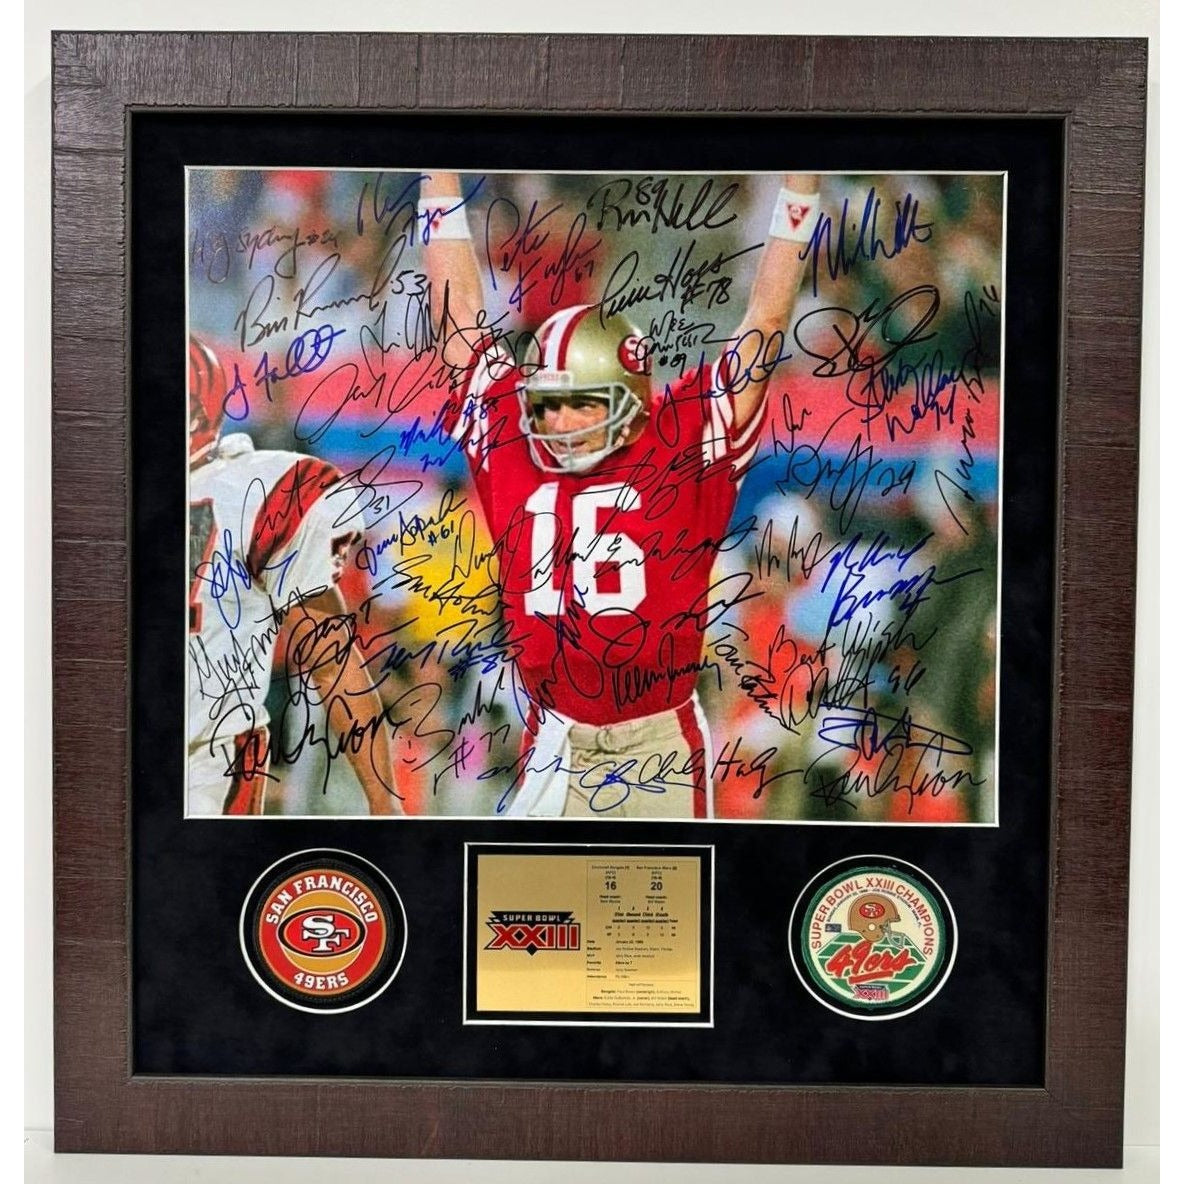 Joe Montana Jerry Rice Steve Young Ronnie Lott San Francisco 49ers 1989 90 Super bowl Champions 16x20 photo team signed and framed (25x27)